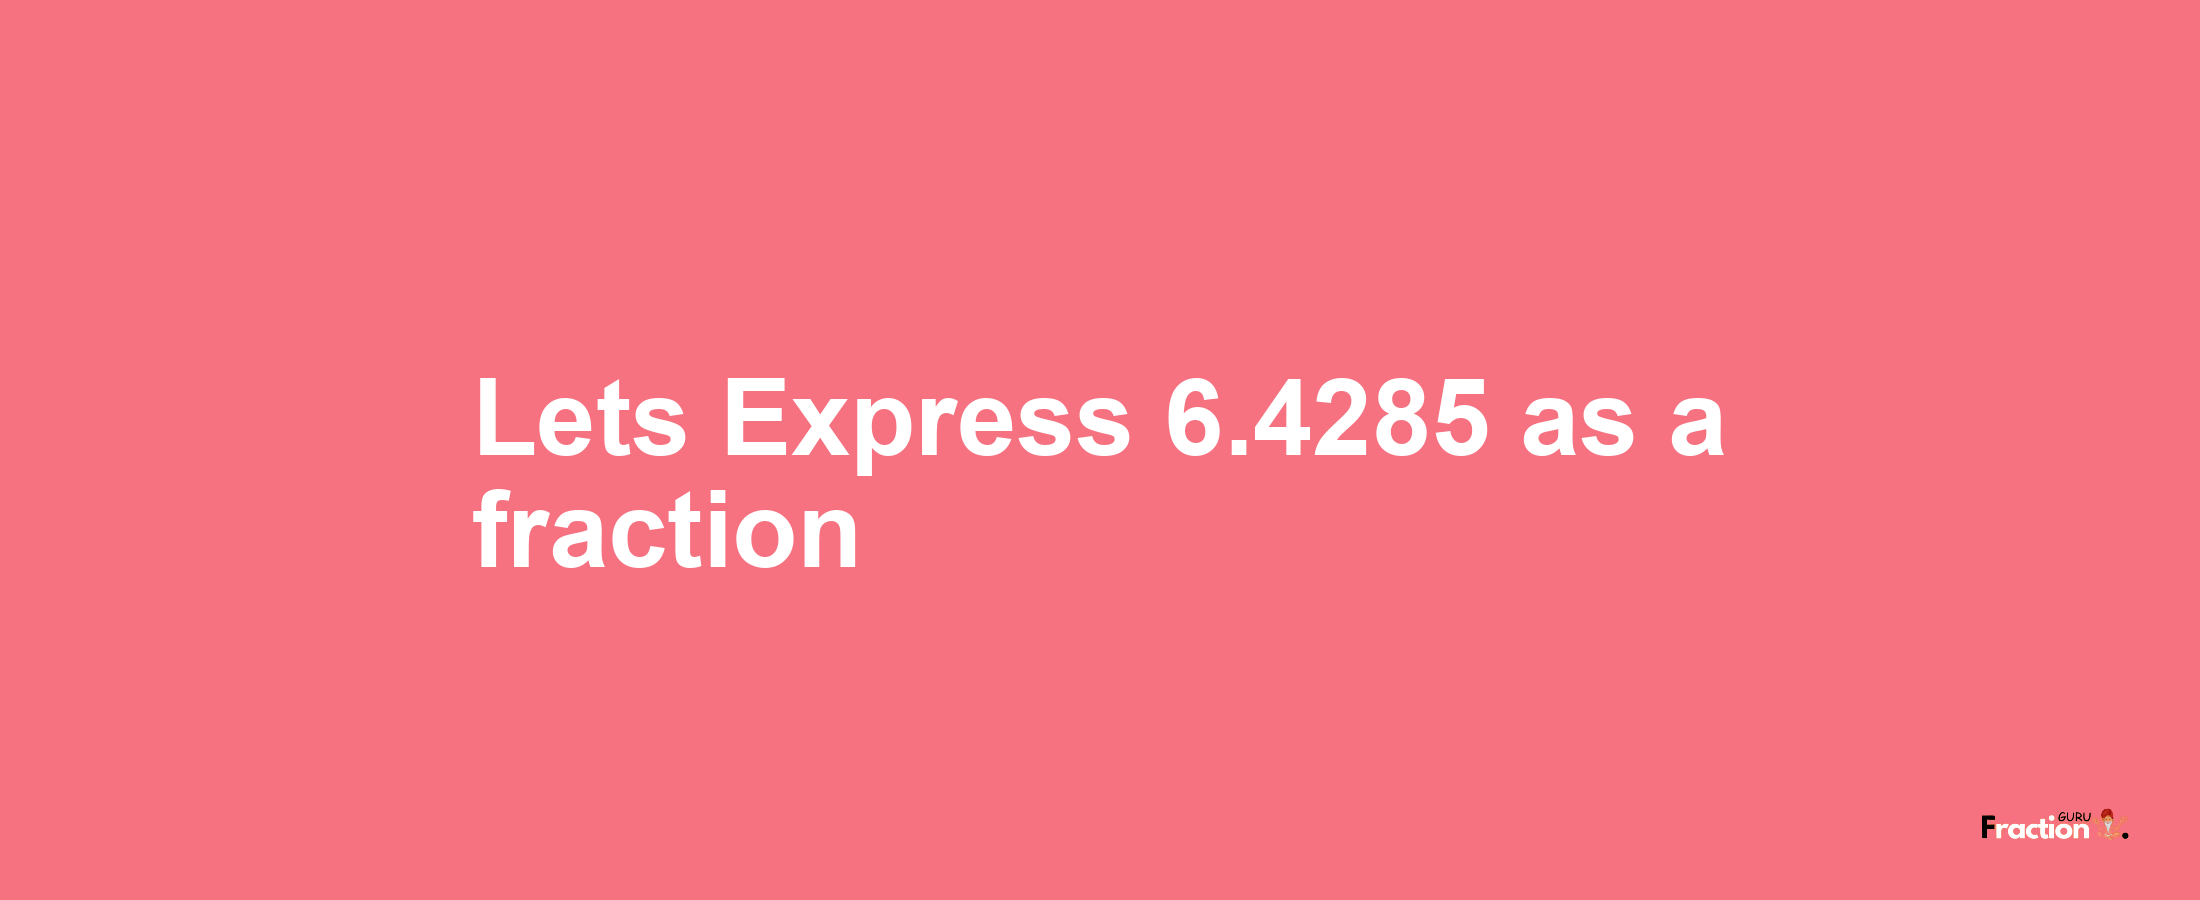 Lets Express 6.4285 as afraction